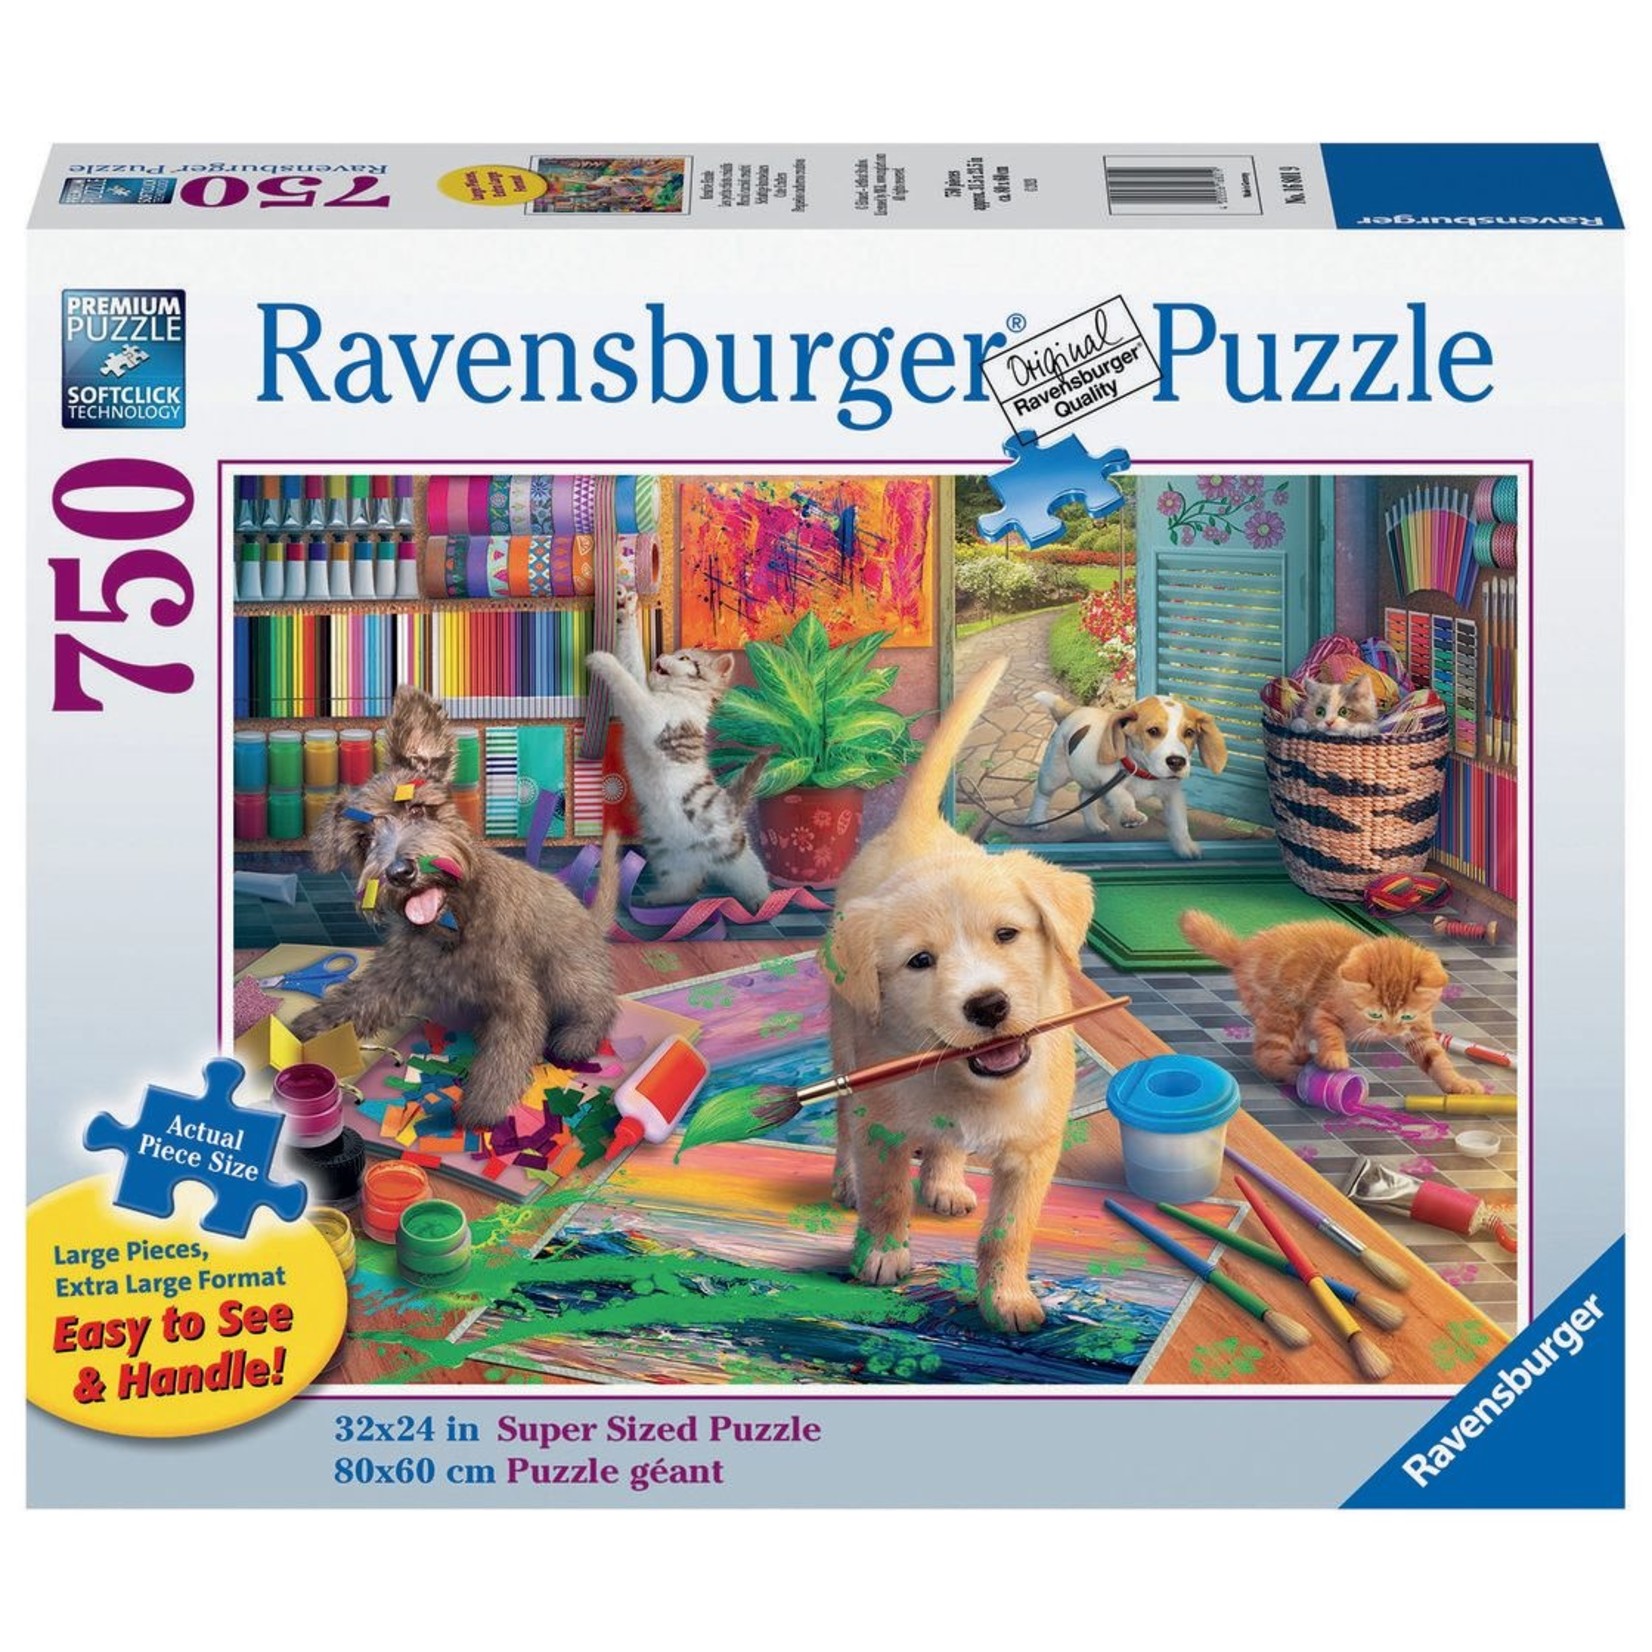 Ravensburger Cute Crafters - Large Print 750pc